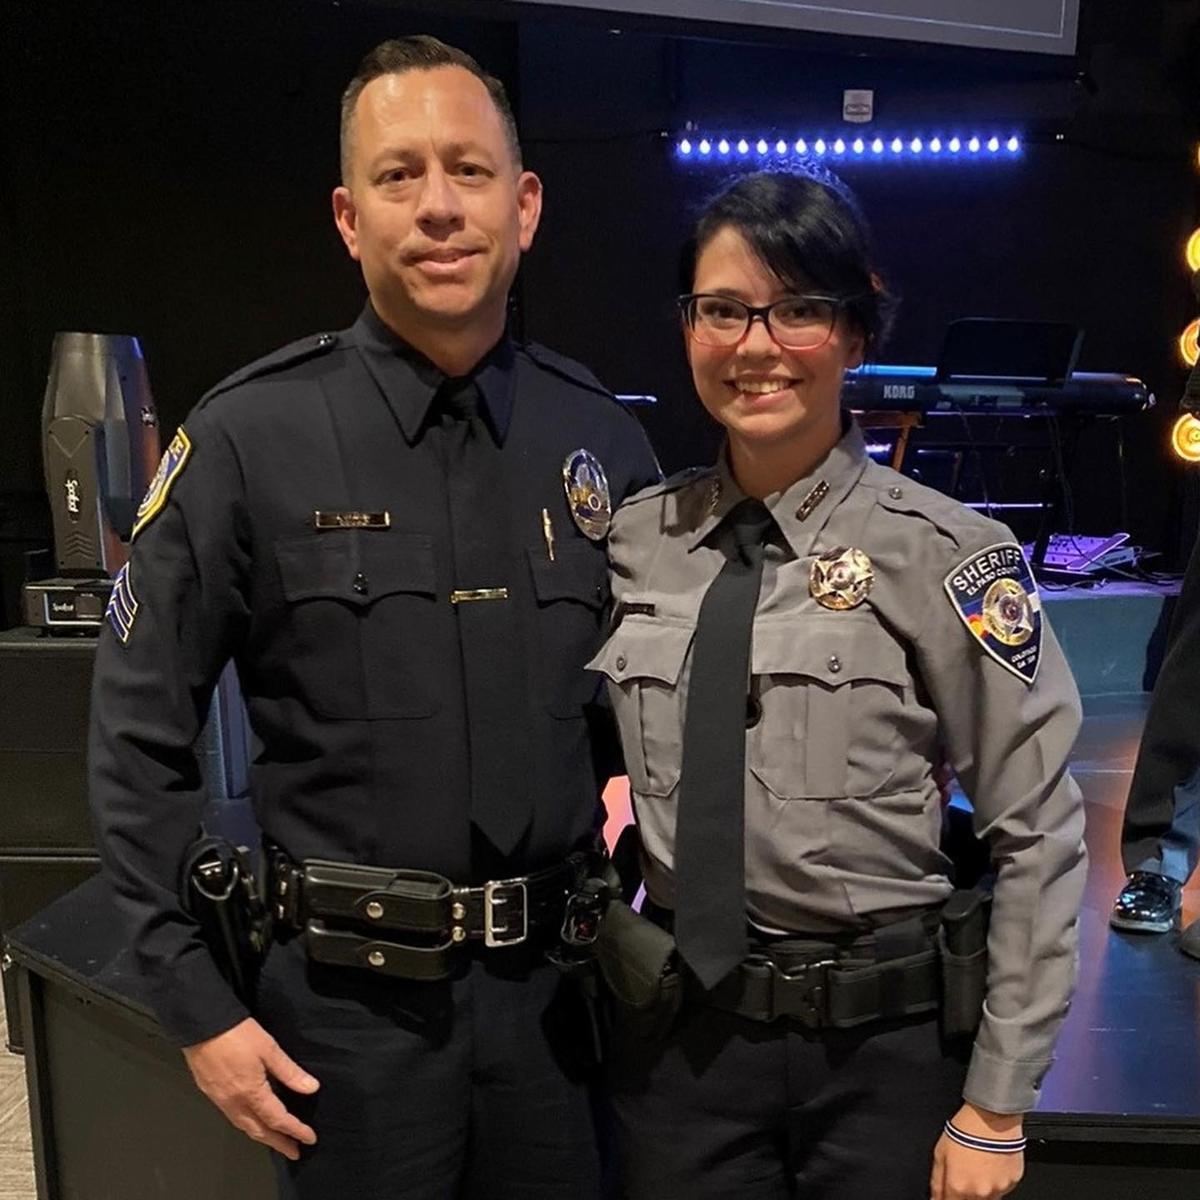 Escondido police Sgt. Jeff Valdivia with Dep. Natalie Young. (Courtesy of <a href="http://www.epcounty.com/sheriff/">El Paso County Sheriff’s Office</a>)